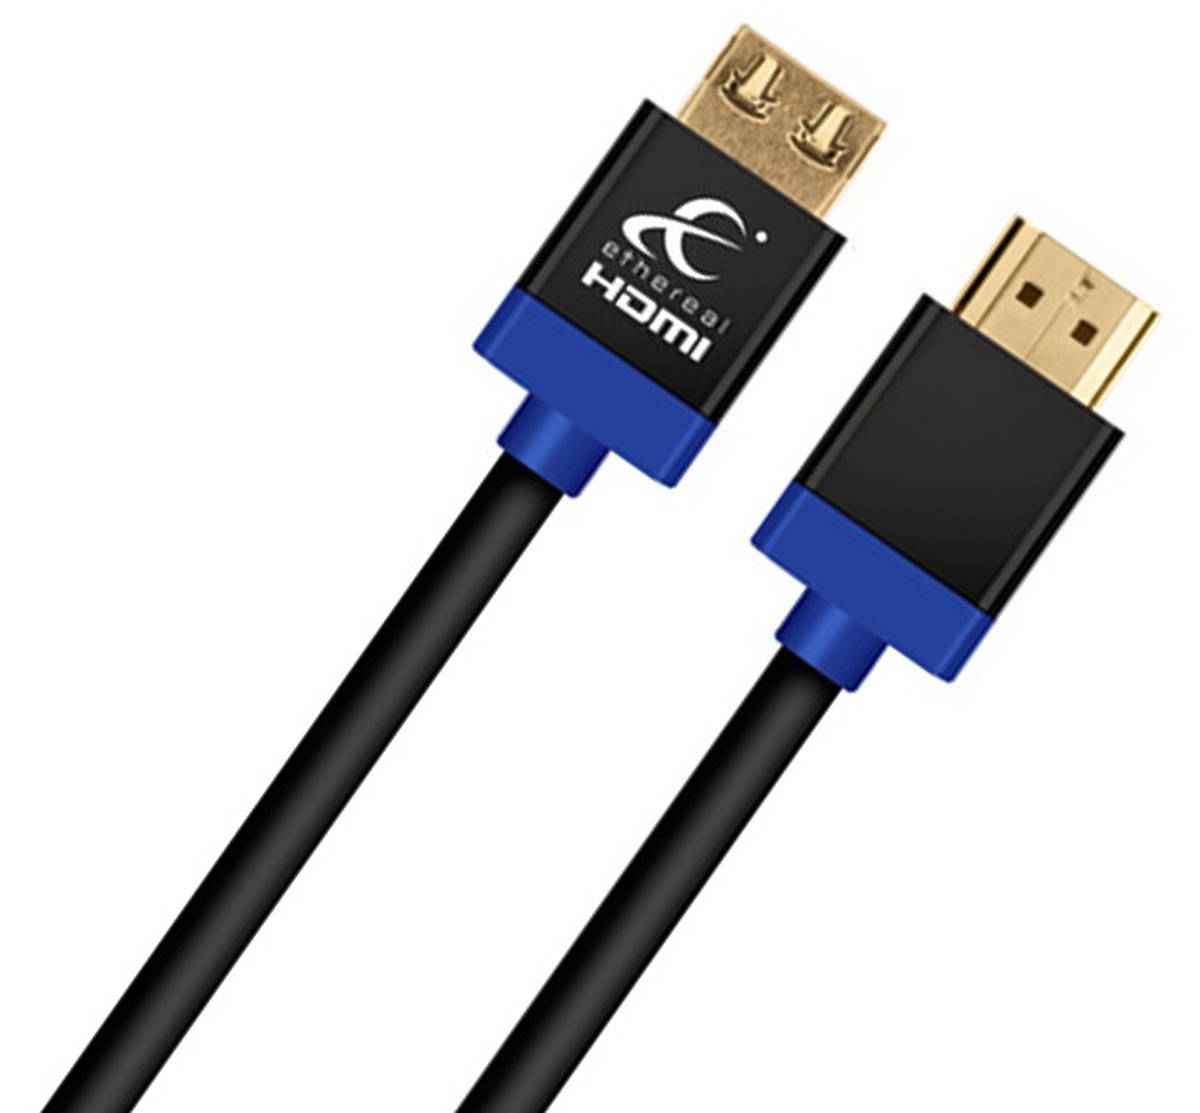 MHY-LHDME3 3.00m Metra Ethereal MHY HDMI cable product image. Click to enlarge.